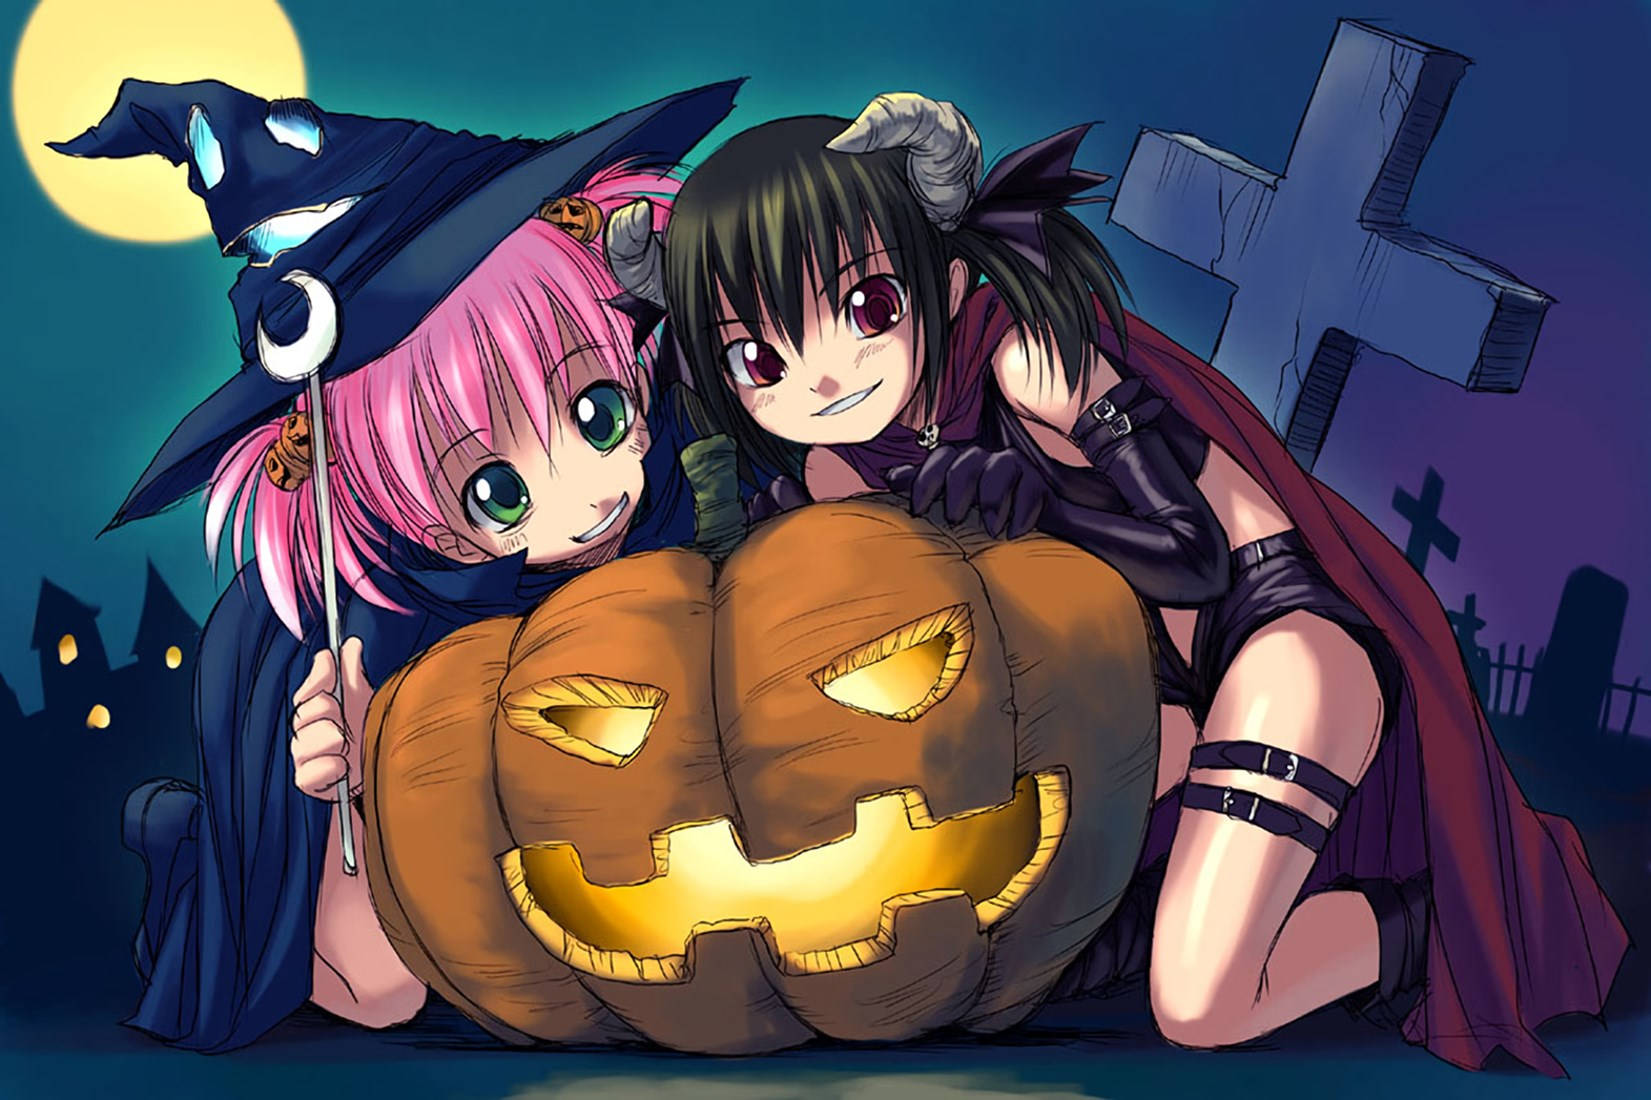 Halloween can be spooky, but fun with these animated friends. Wallpaper